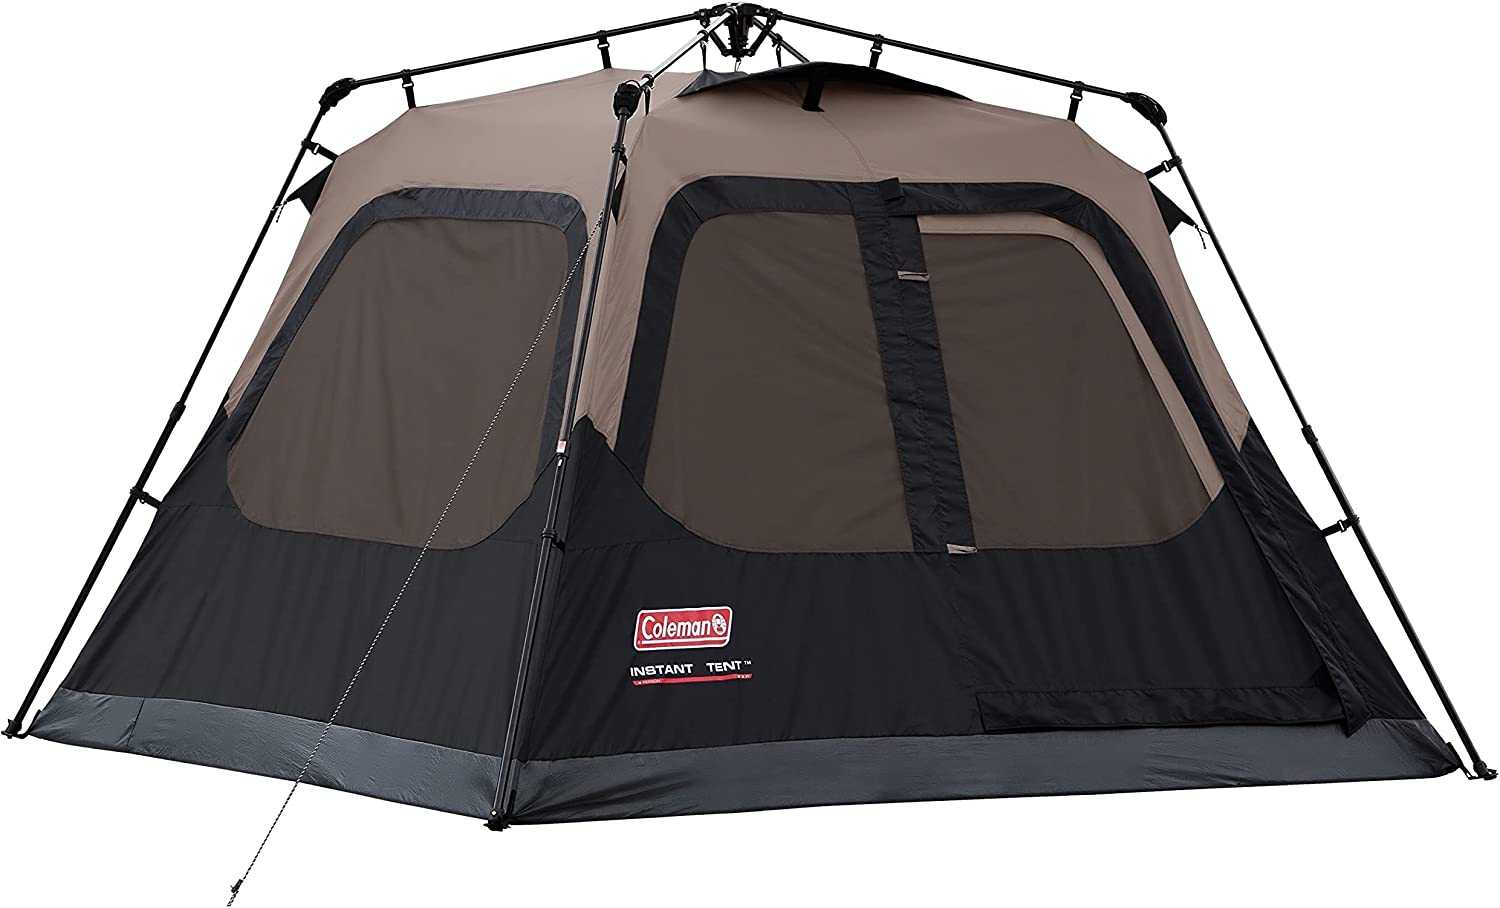 Coleman 4-Person Cabin Tent 46% Off Now At $100.80